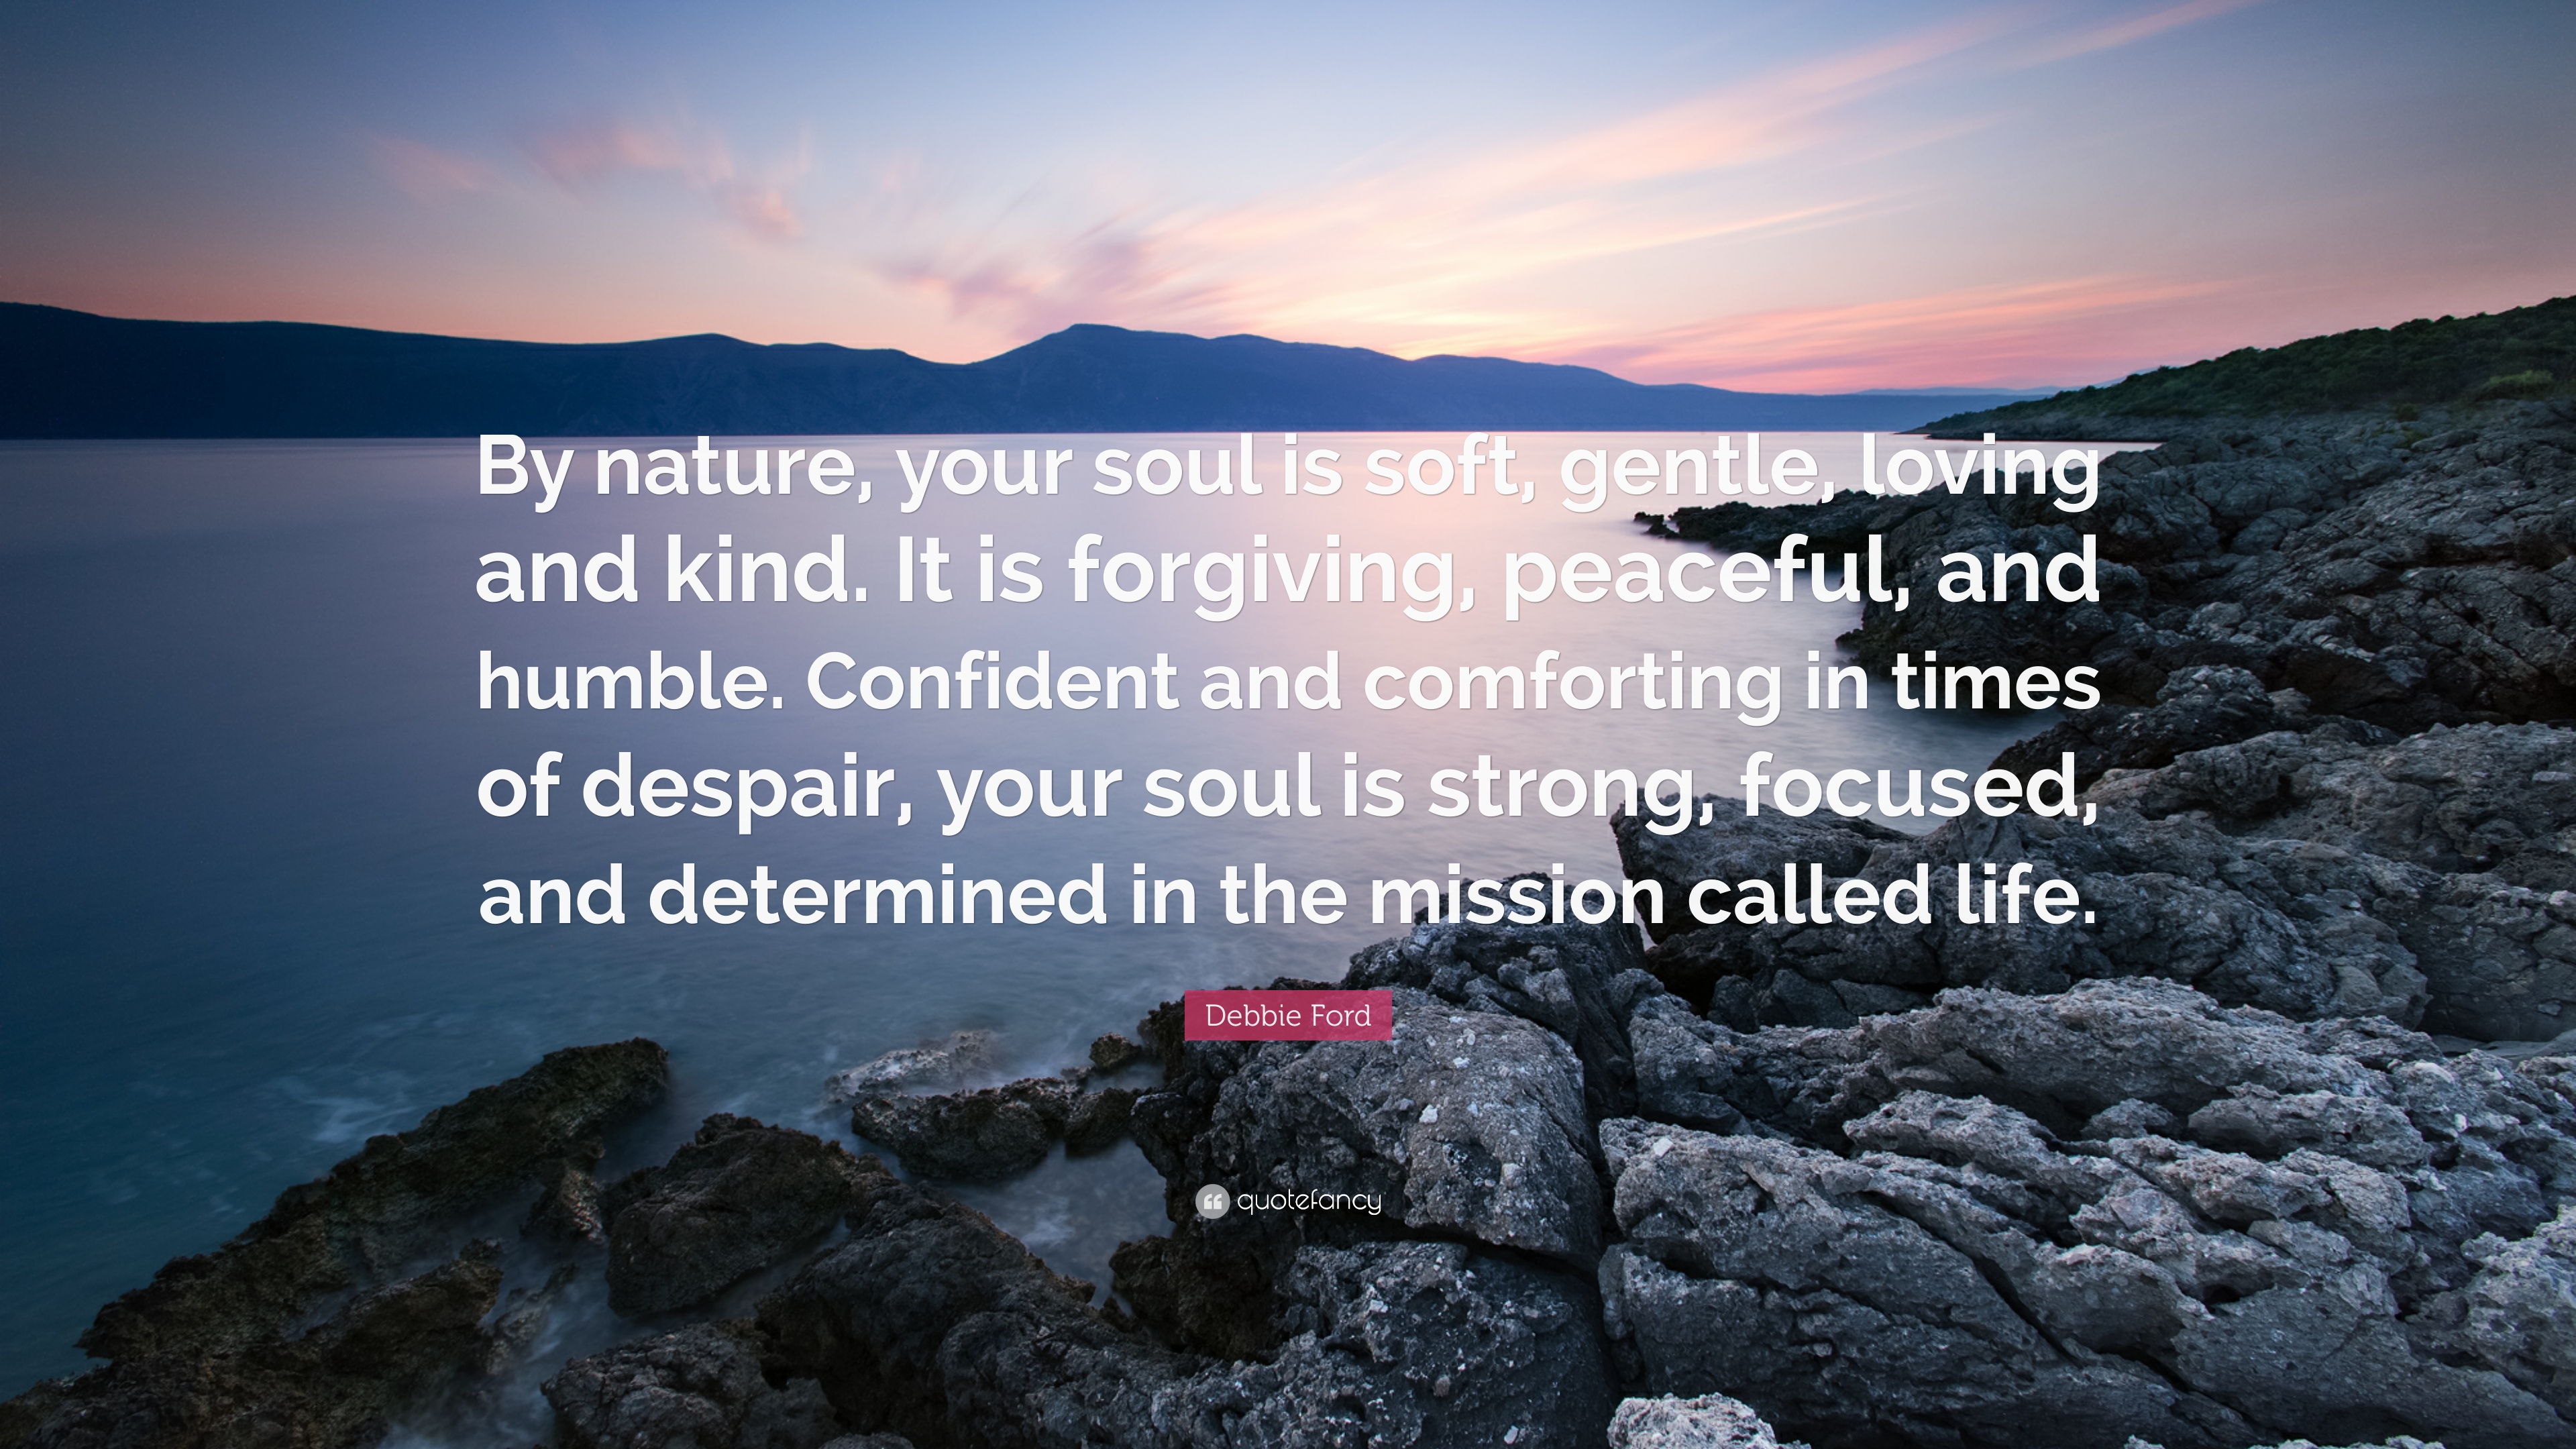 Debbie Ford Quote: “By nature, your soul is soft, gentle, loving and ...